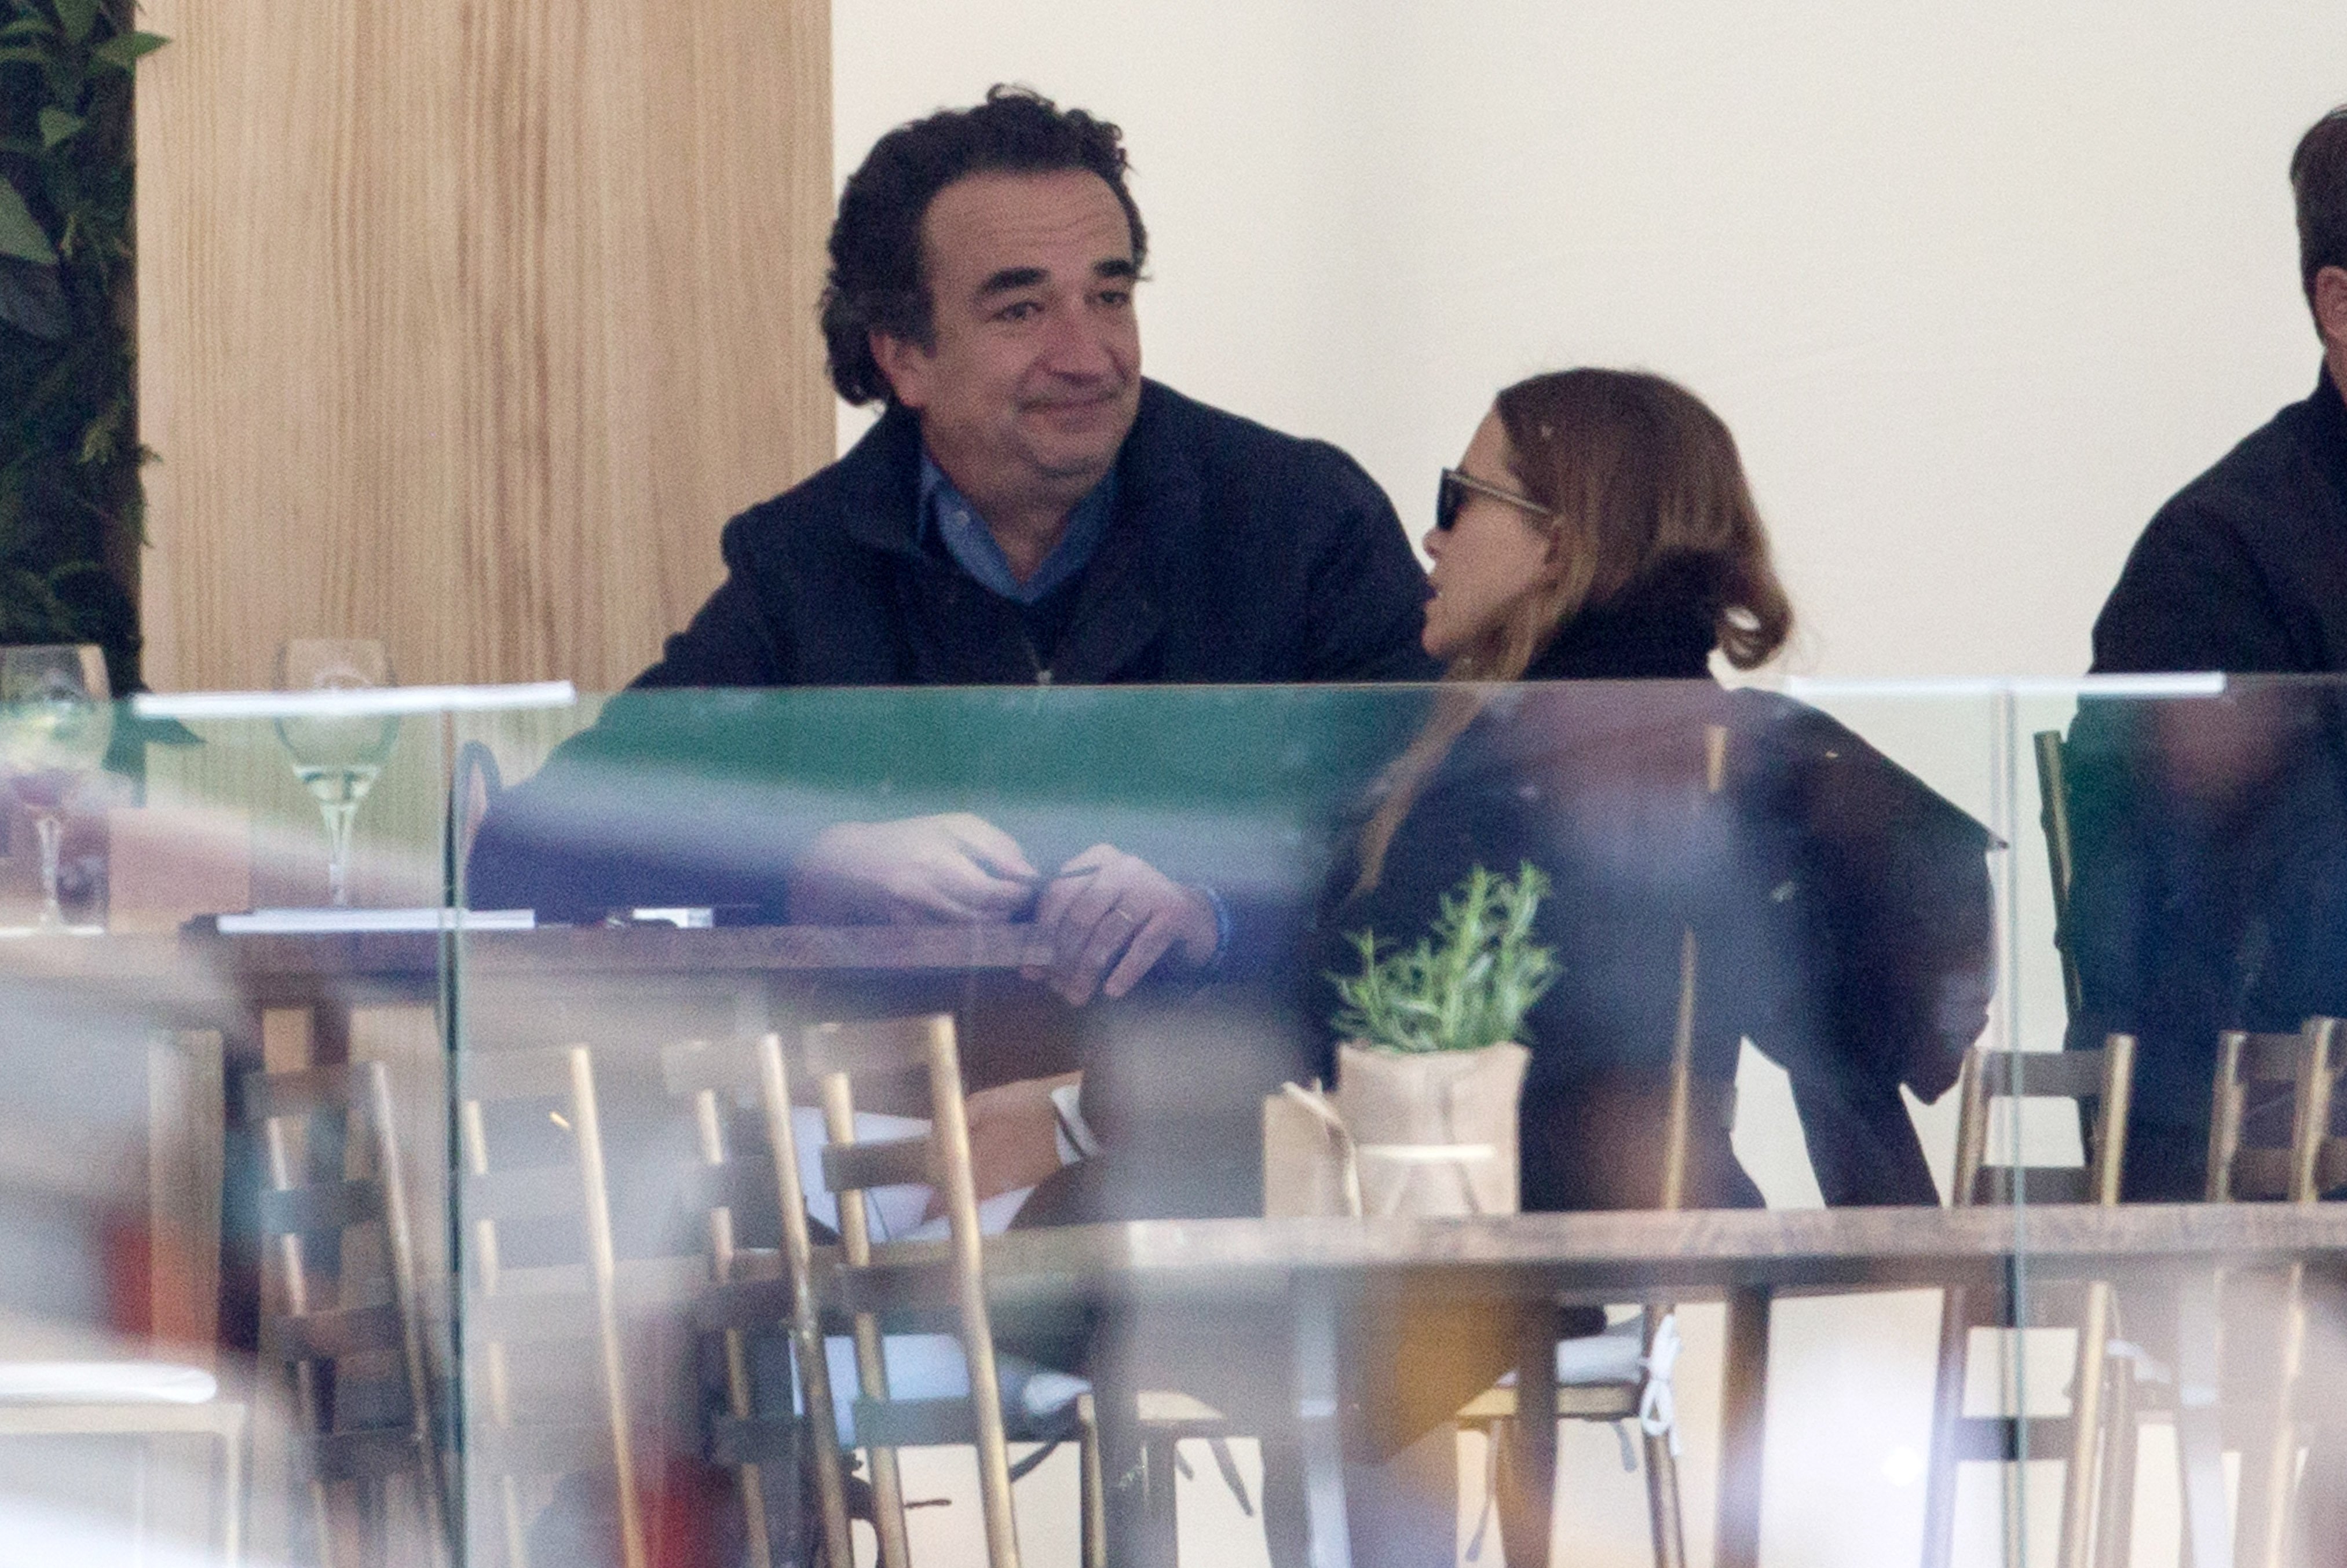 Mary Kate Olsen and Olivier Sarkozy during Madrid-Longines Champions, the International Global Champions Tour at Club de Campo Villa de Madrid on May 18, 2019 in Madrid, Spain. / Source: Getty Images